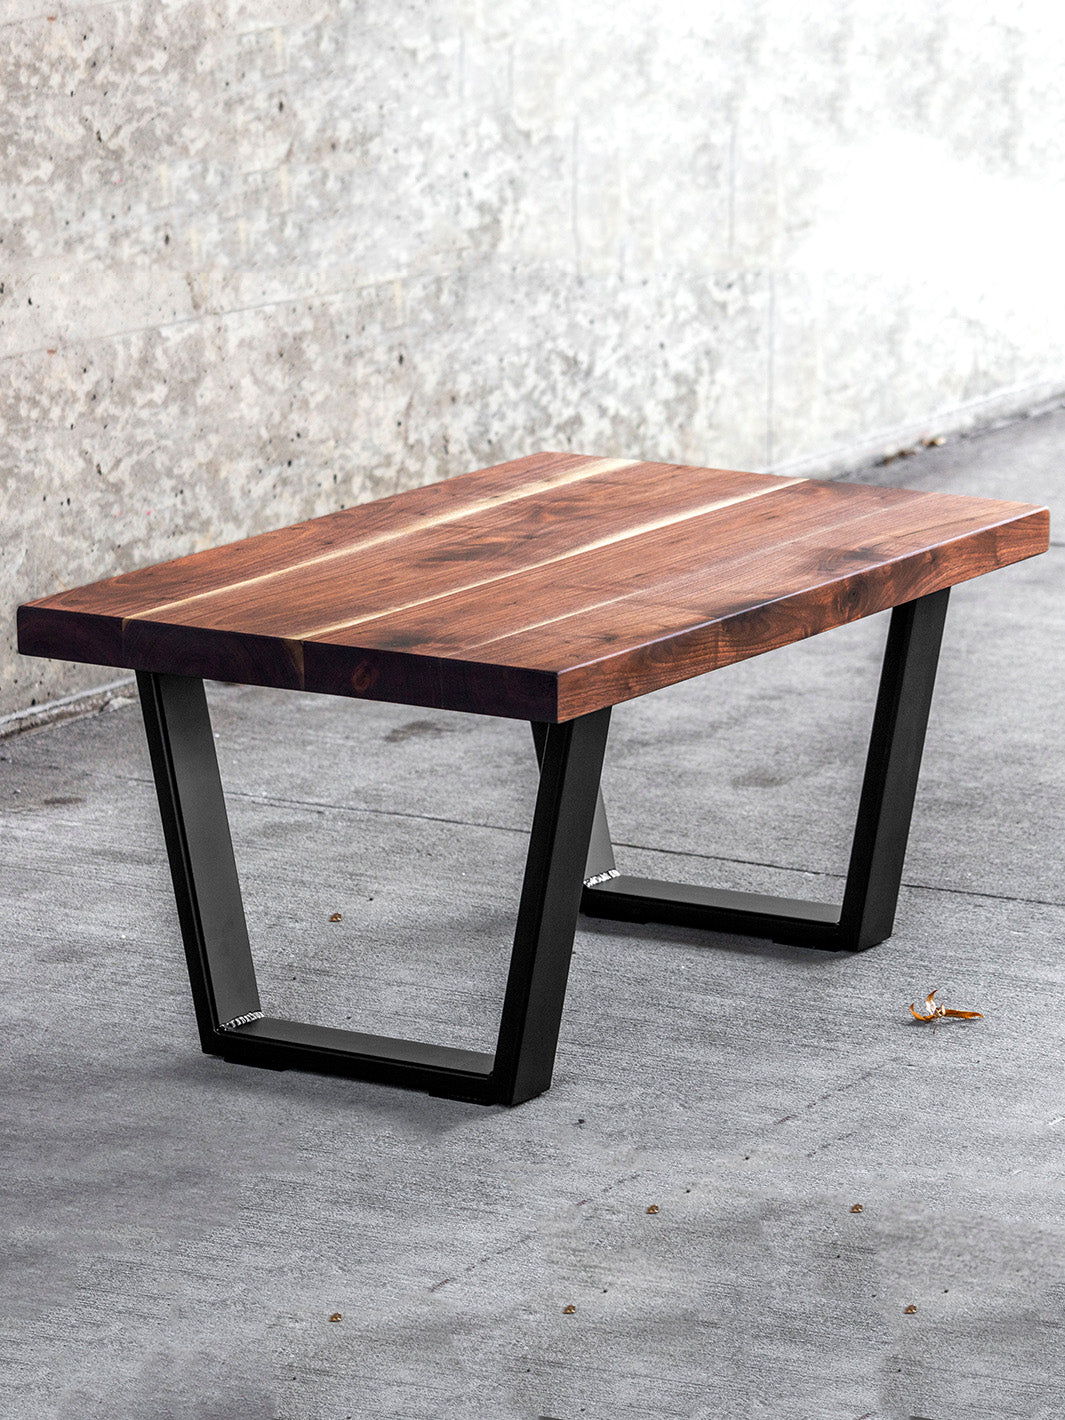 Modern Walnut and Steel Coffee Table Earthly Comfort Coffee Tables 671-8